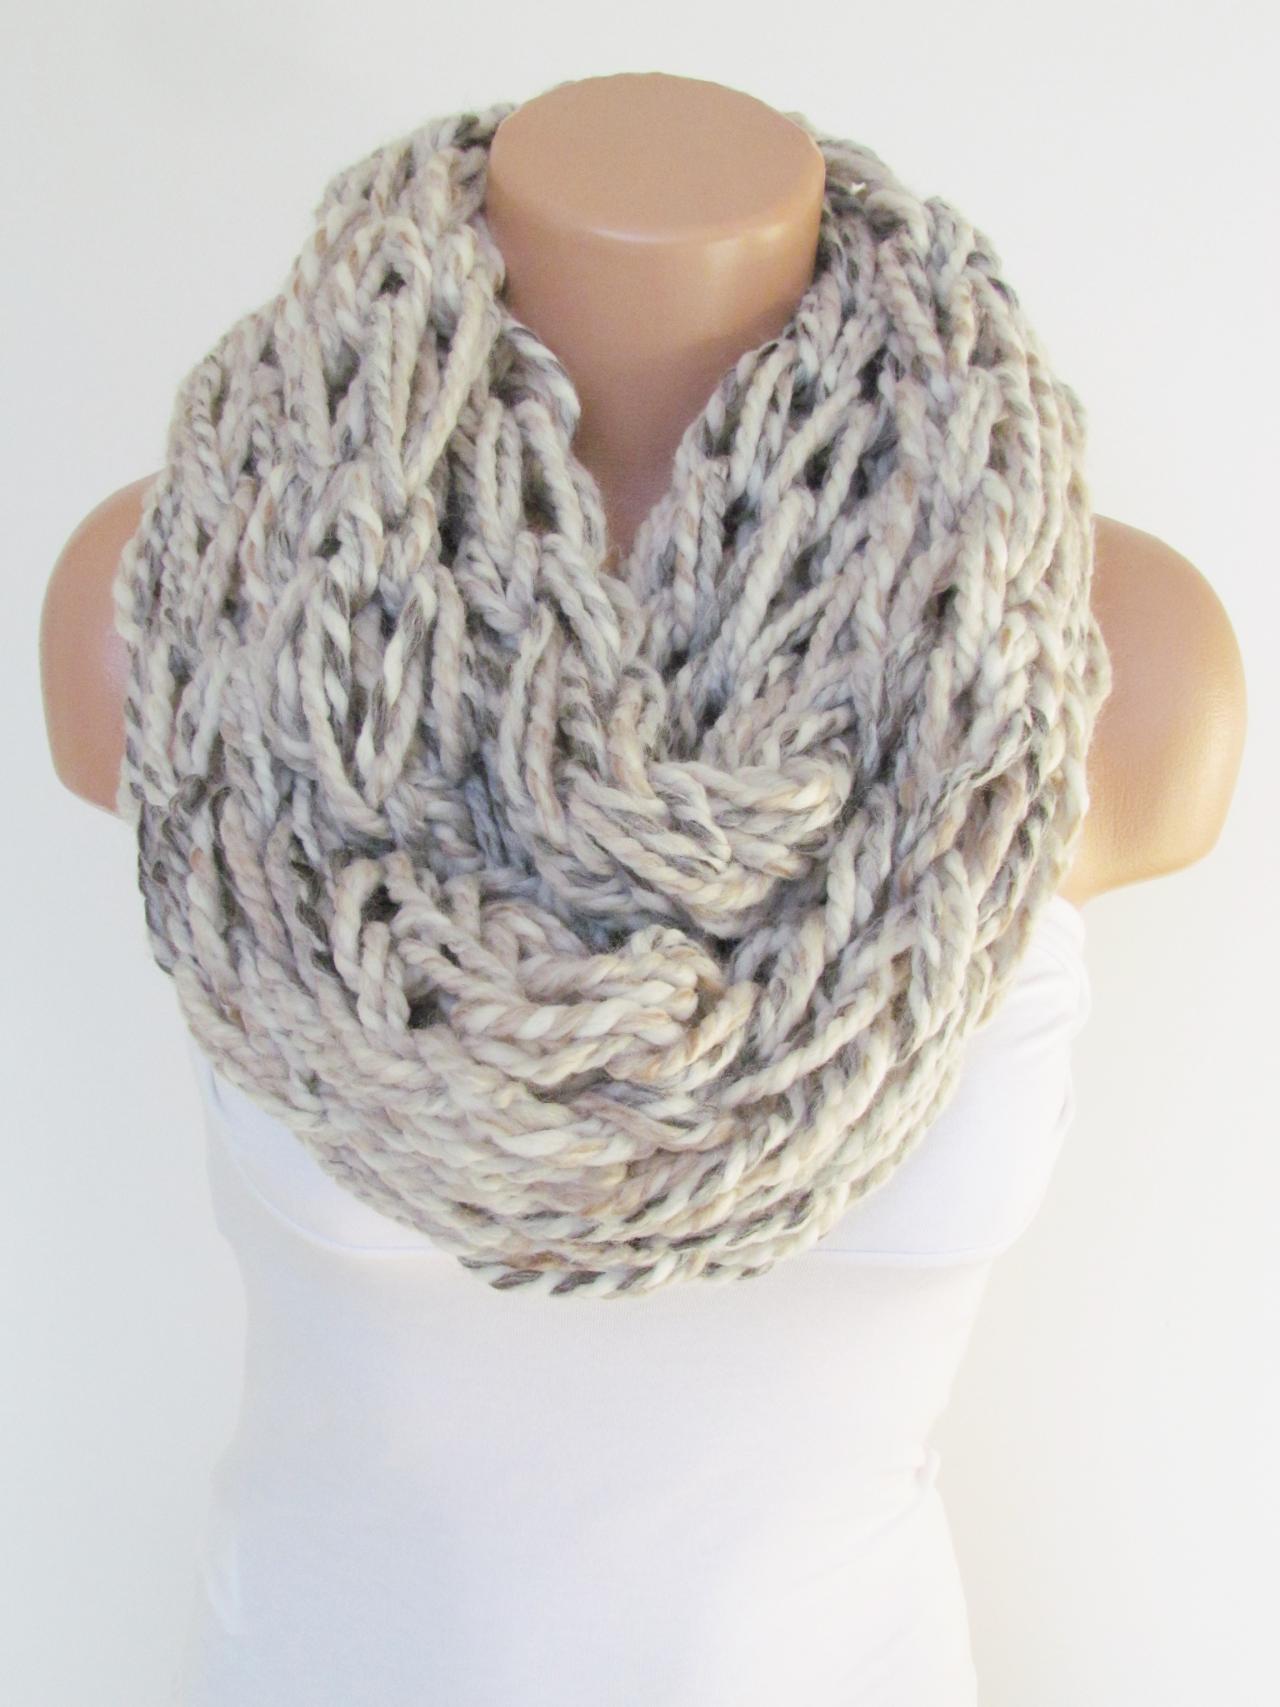 Infinity Stone Cream Gray Scarf,Neckwarmer,Knitted Scarf, Circle Loop Scarf, Winter Accessories, Fall Fashion,Chunky Scarf.Cowl Scarf